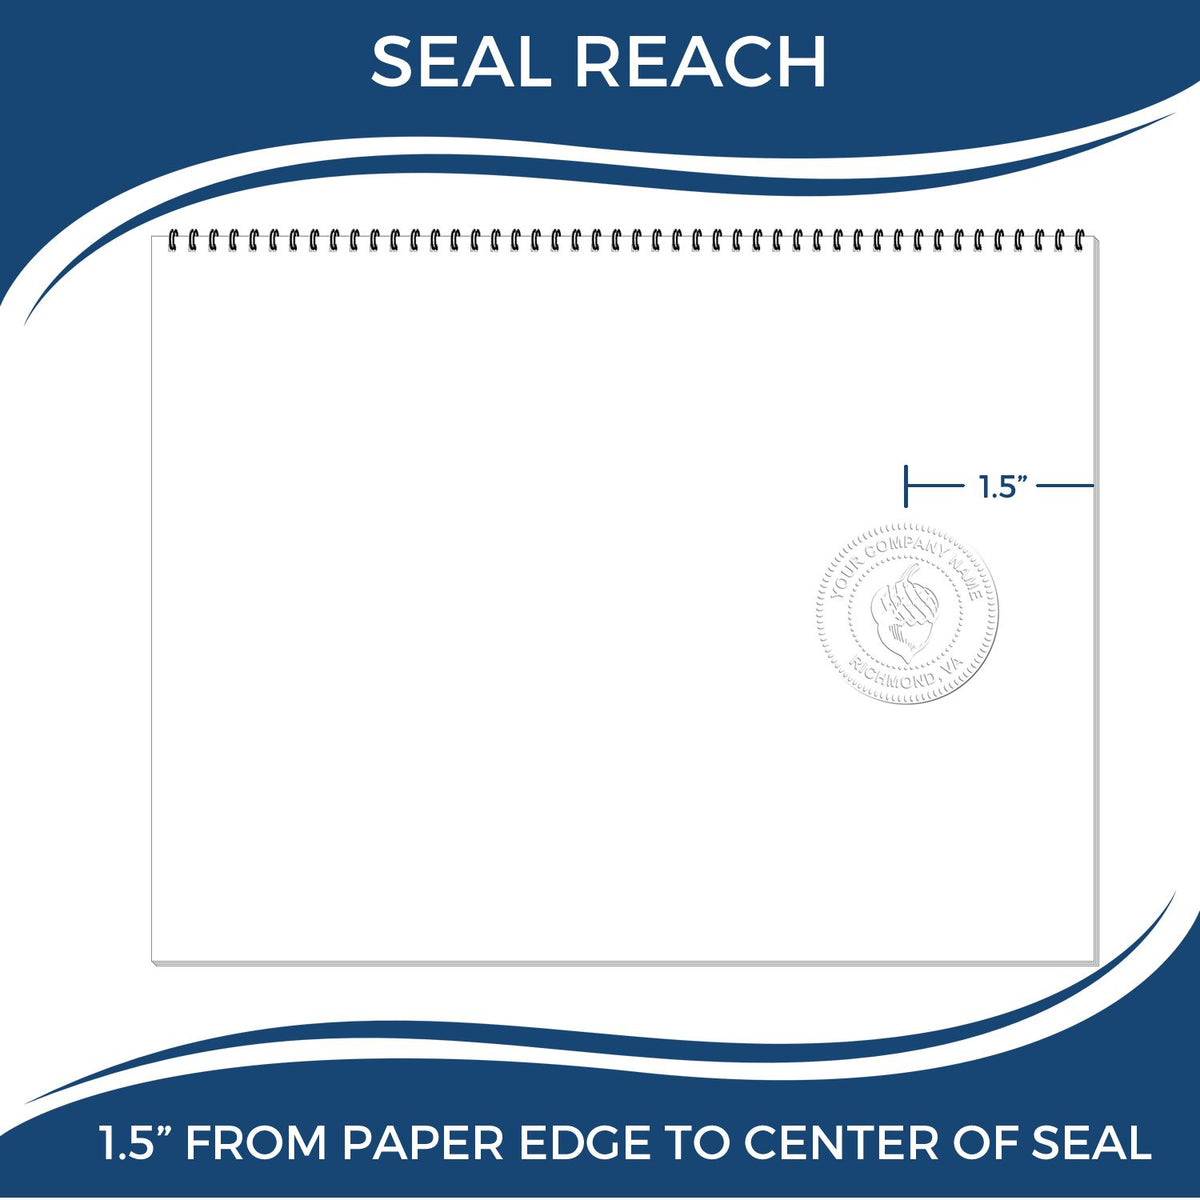 An infographic showing the seal reach which is represented by a ruler and a miniature seal image of the Gift Massachusetts Land Surveyor Seal